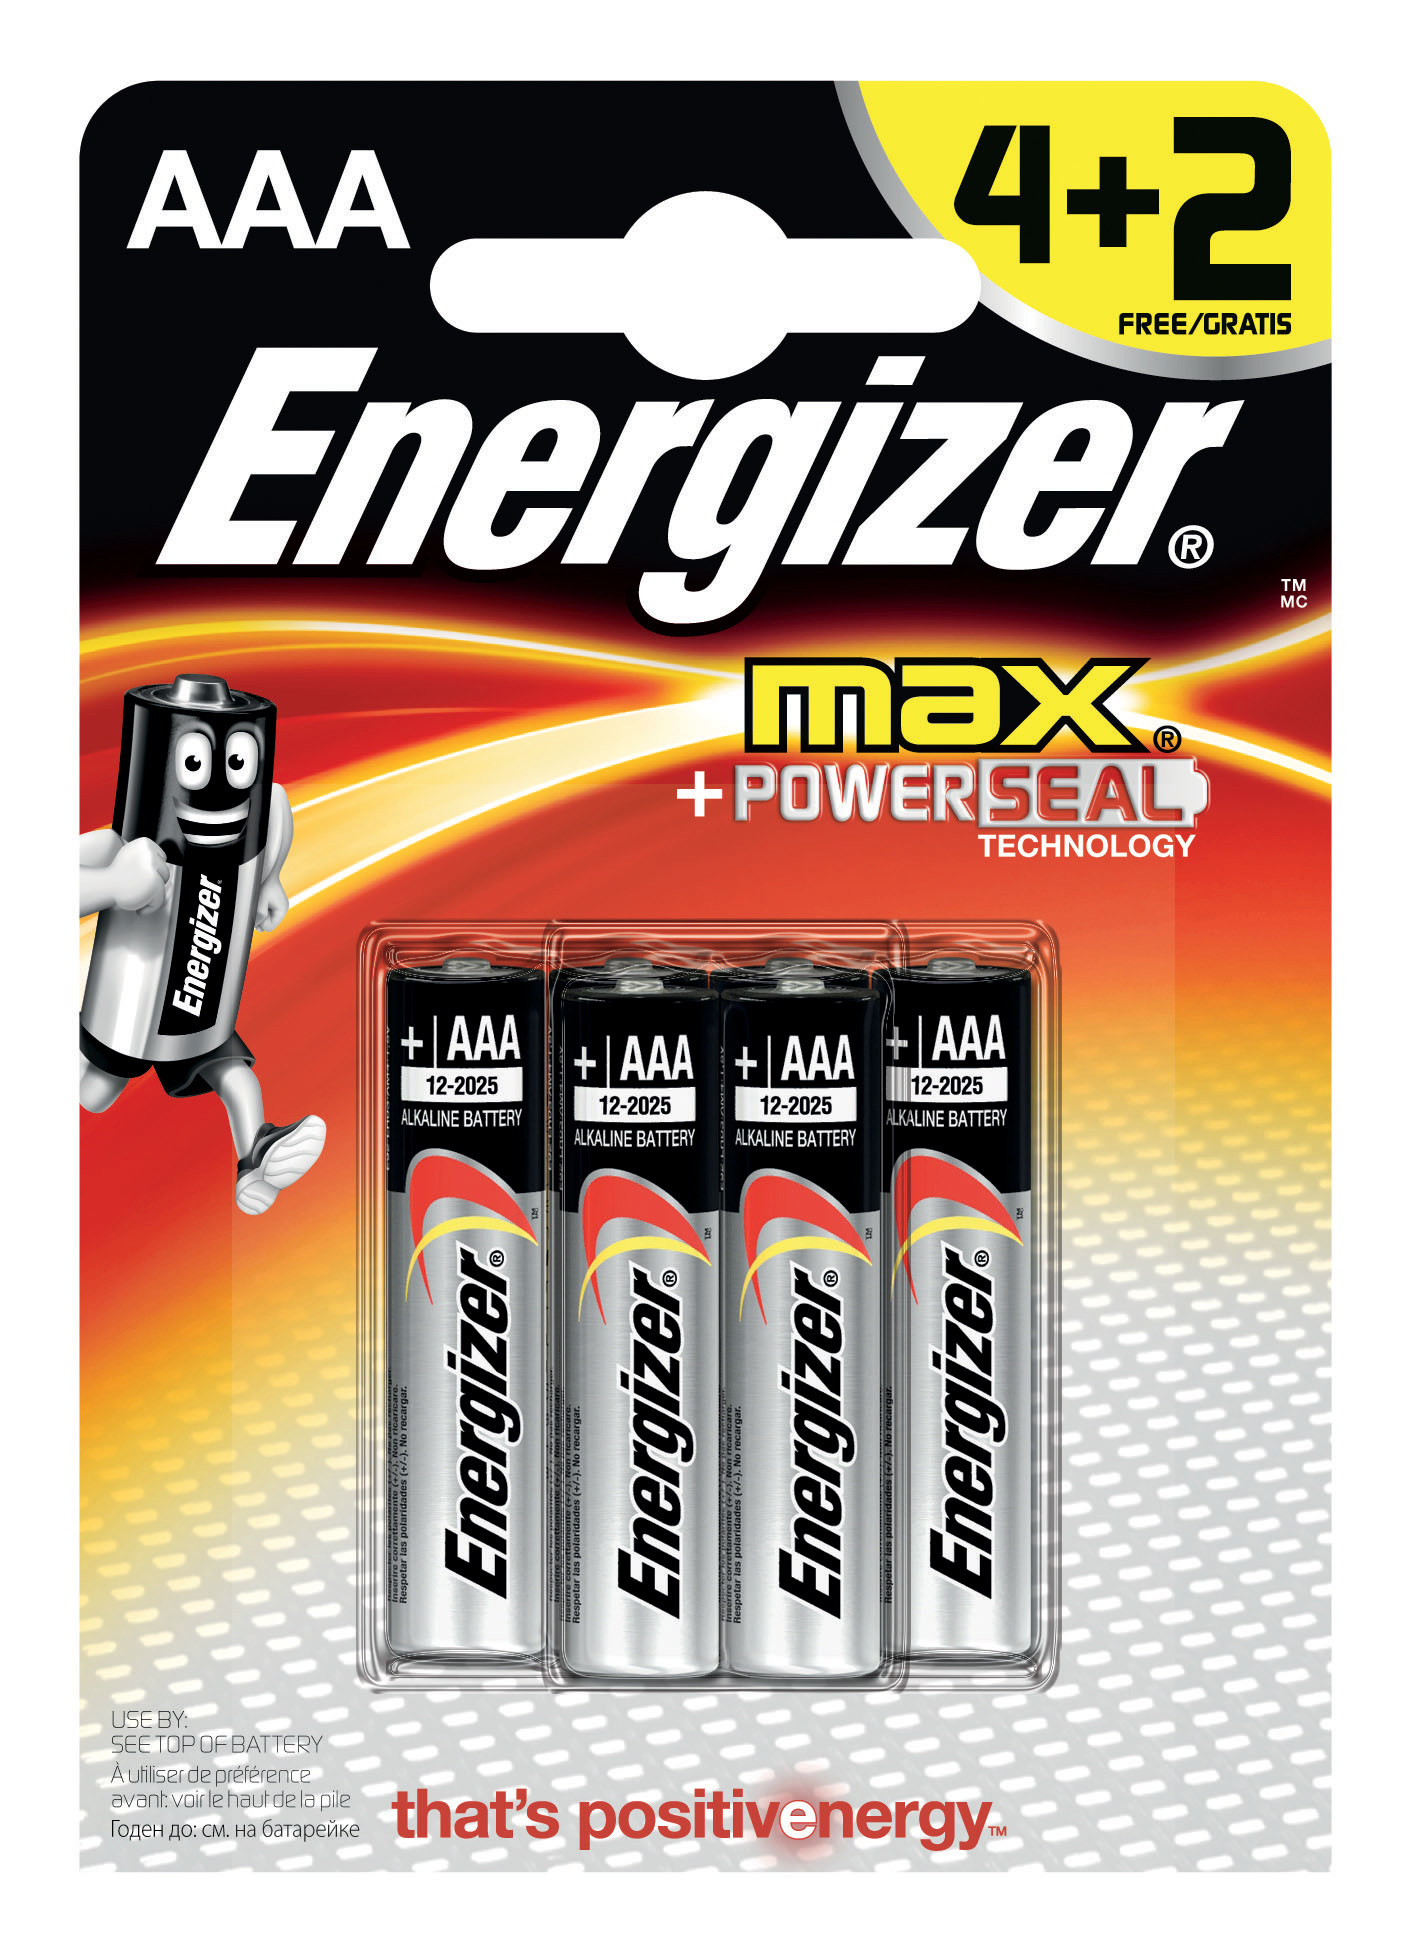 Baterie Energizer MAX + PowerSeal AAA 4+2 Baterie Energizer MAX + PowerSeal AAA 4+2